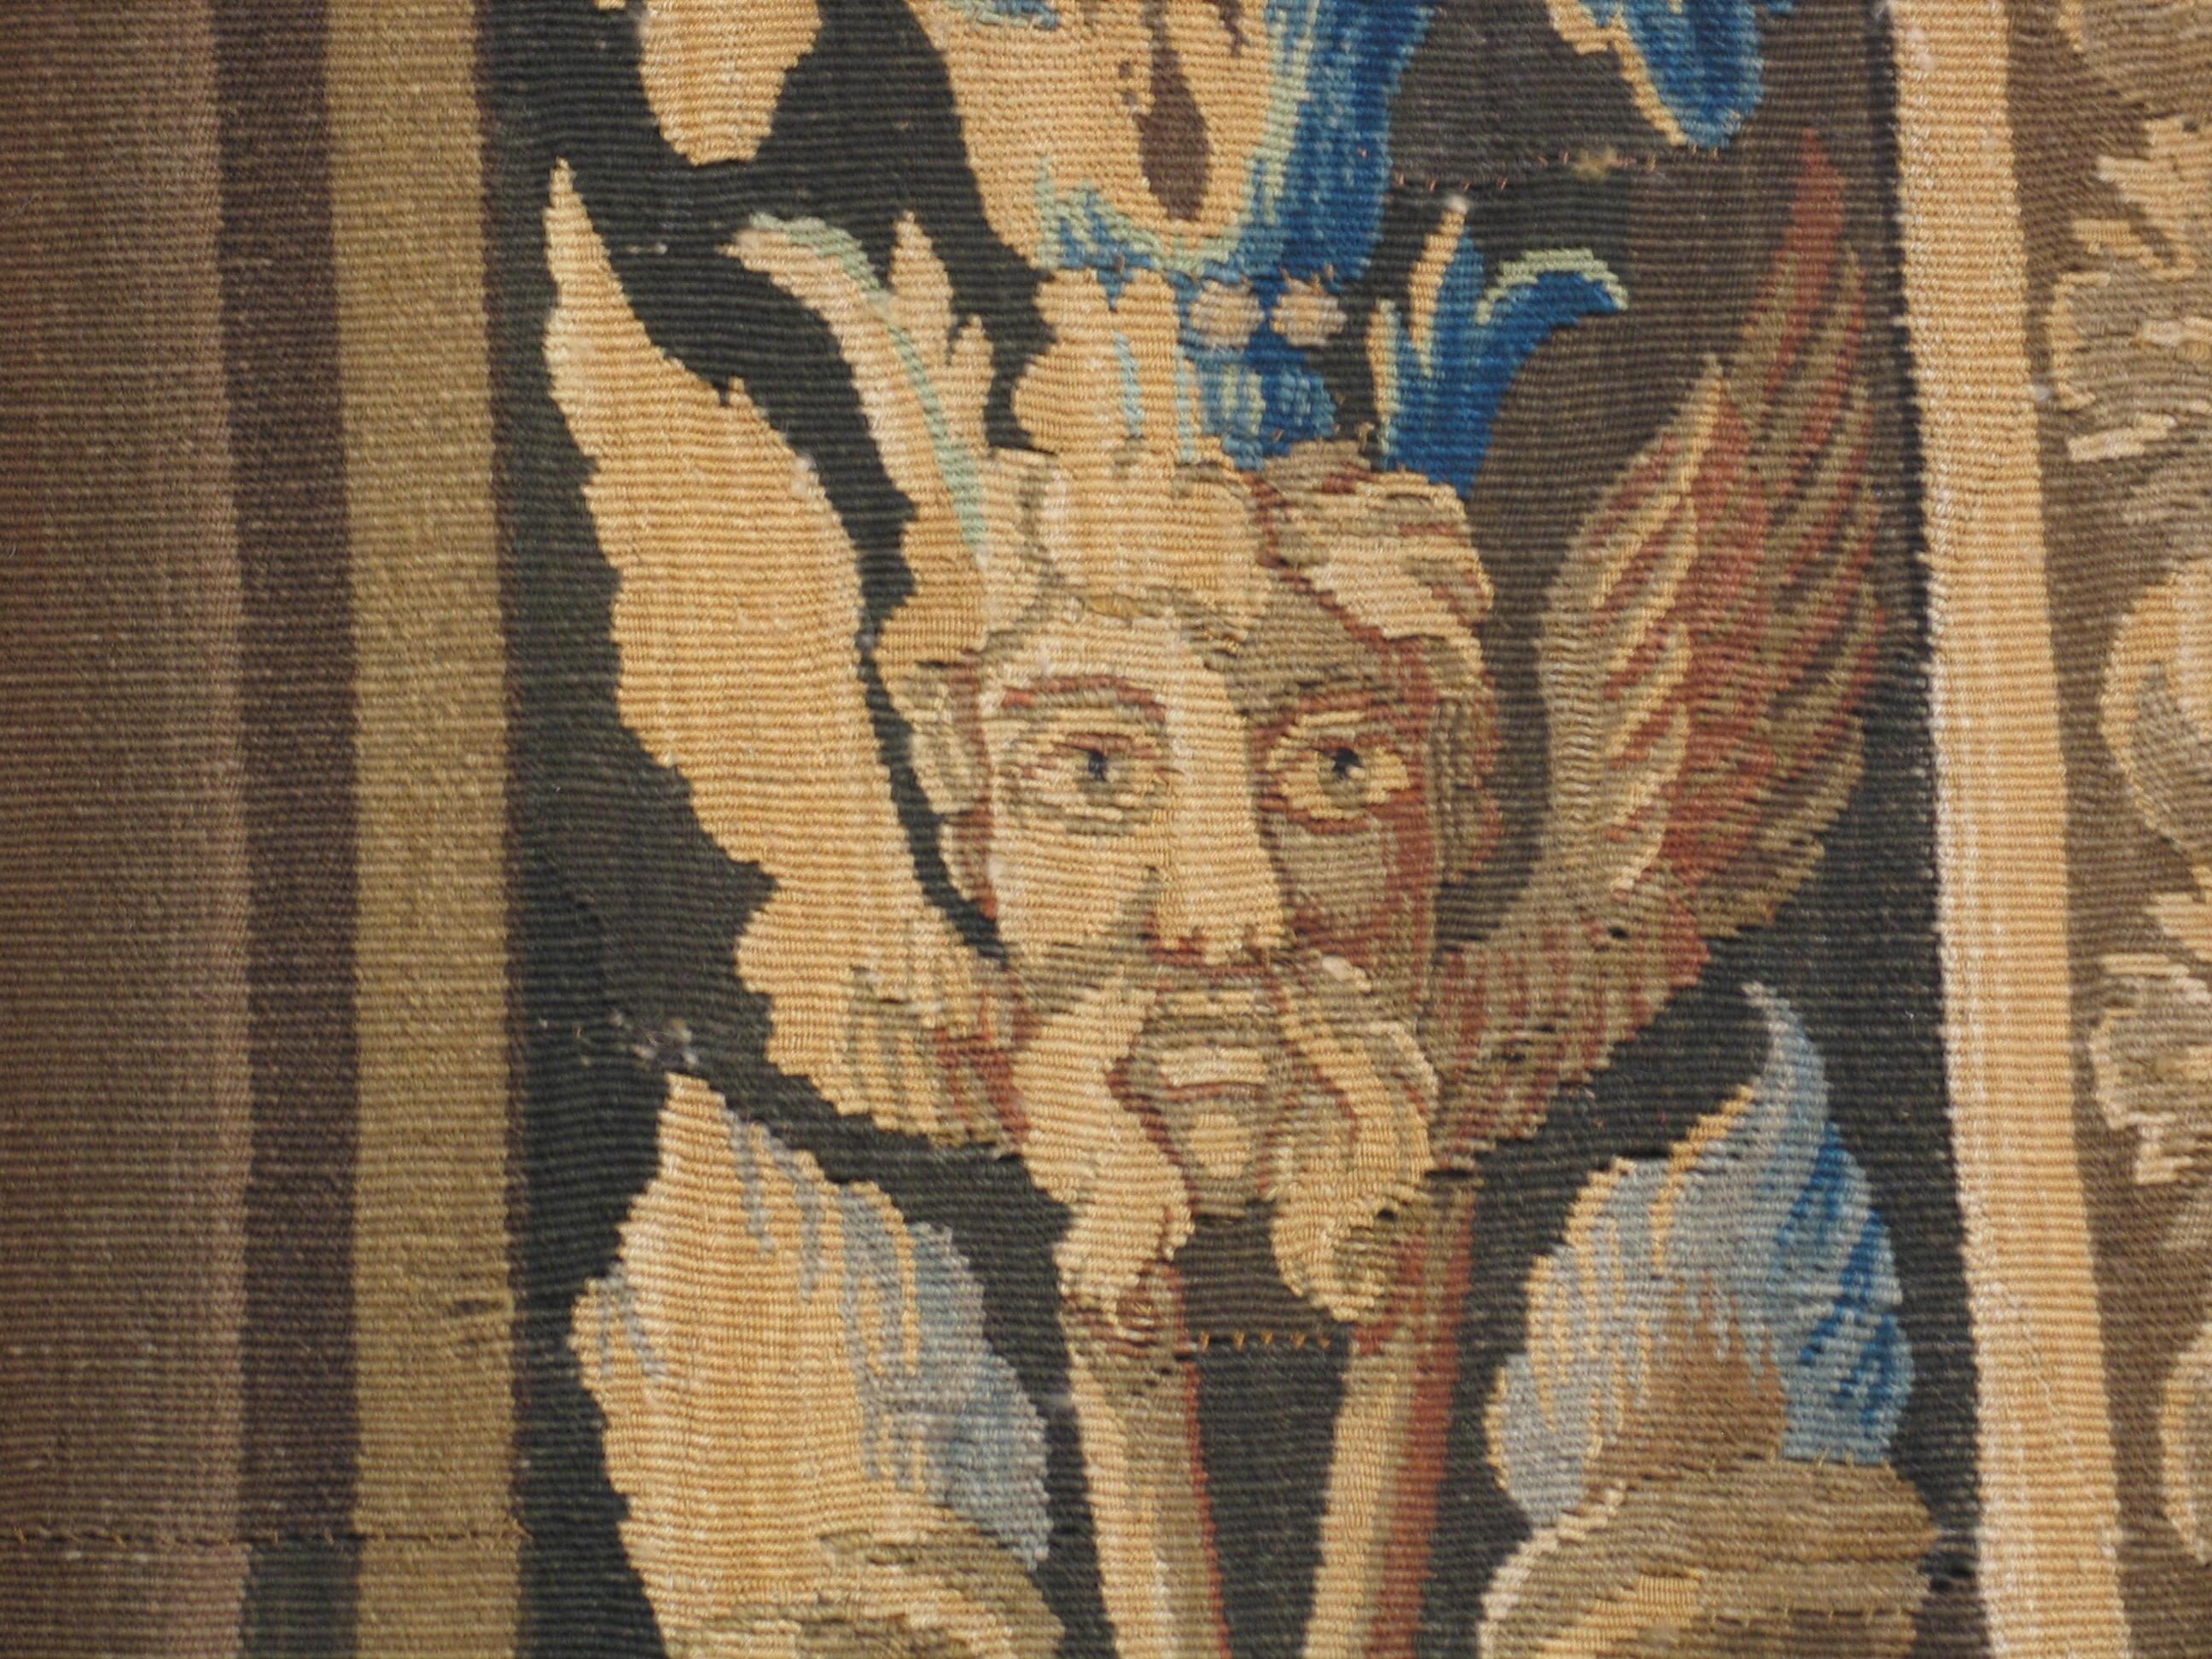 Mid 17th Century Brussels Tapestry ( 10'6